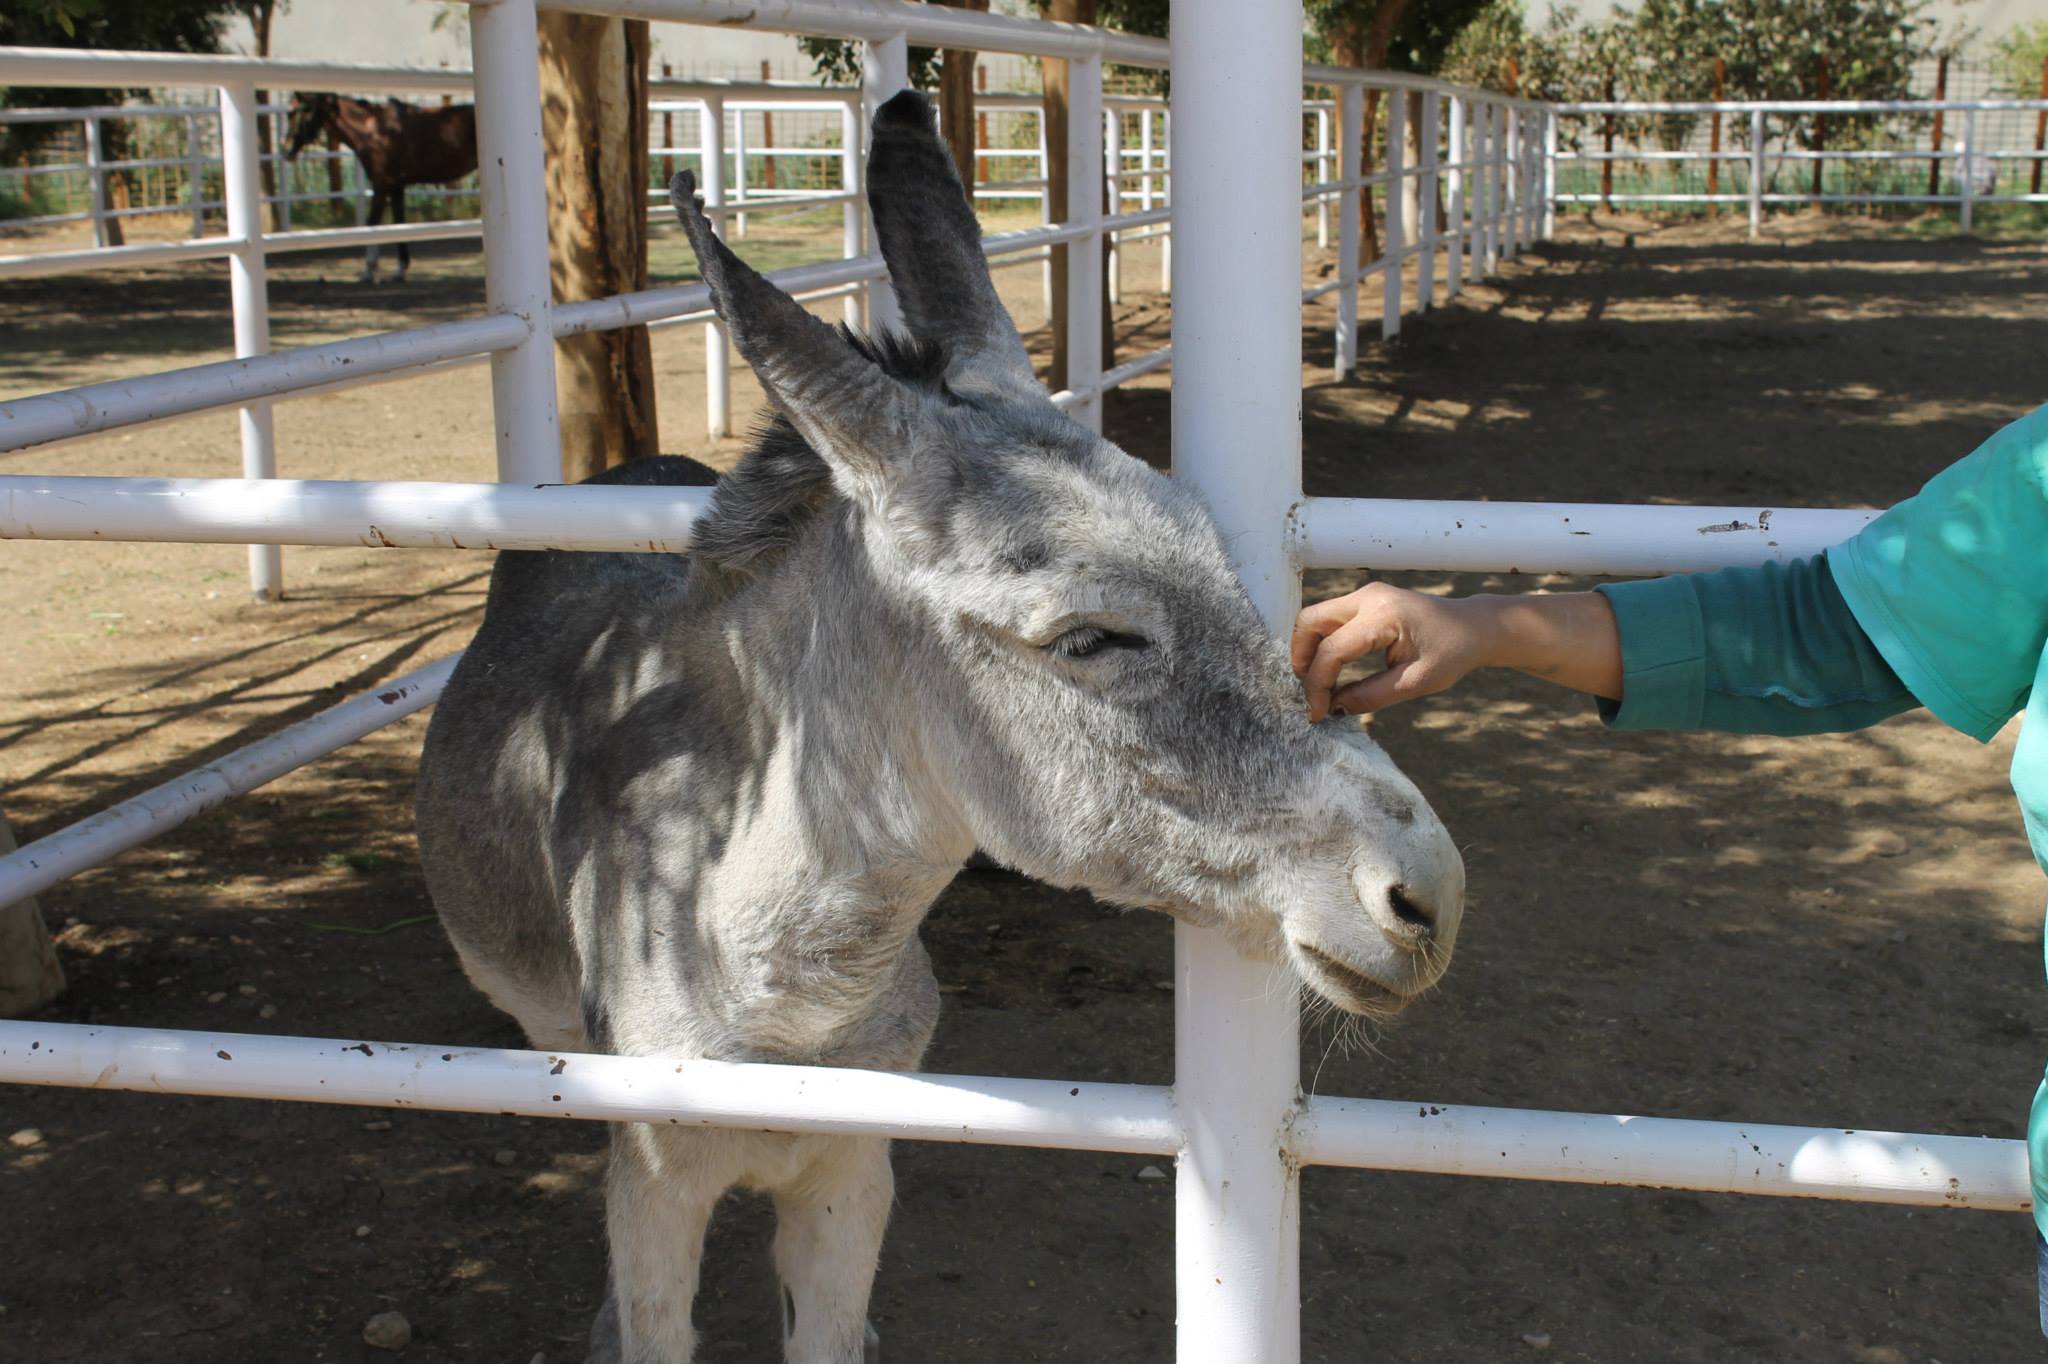 Who said donkeys couldn't be cute? This is felix, one of ACE's residents.